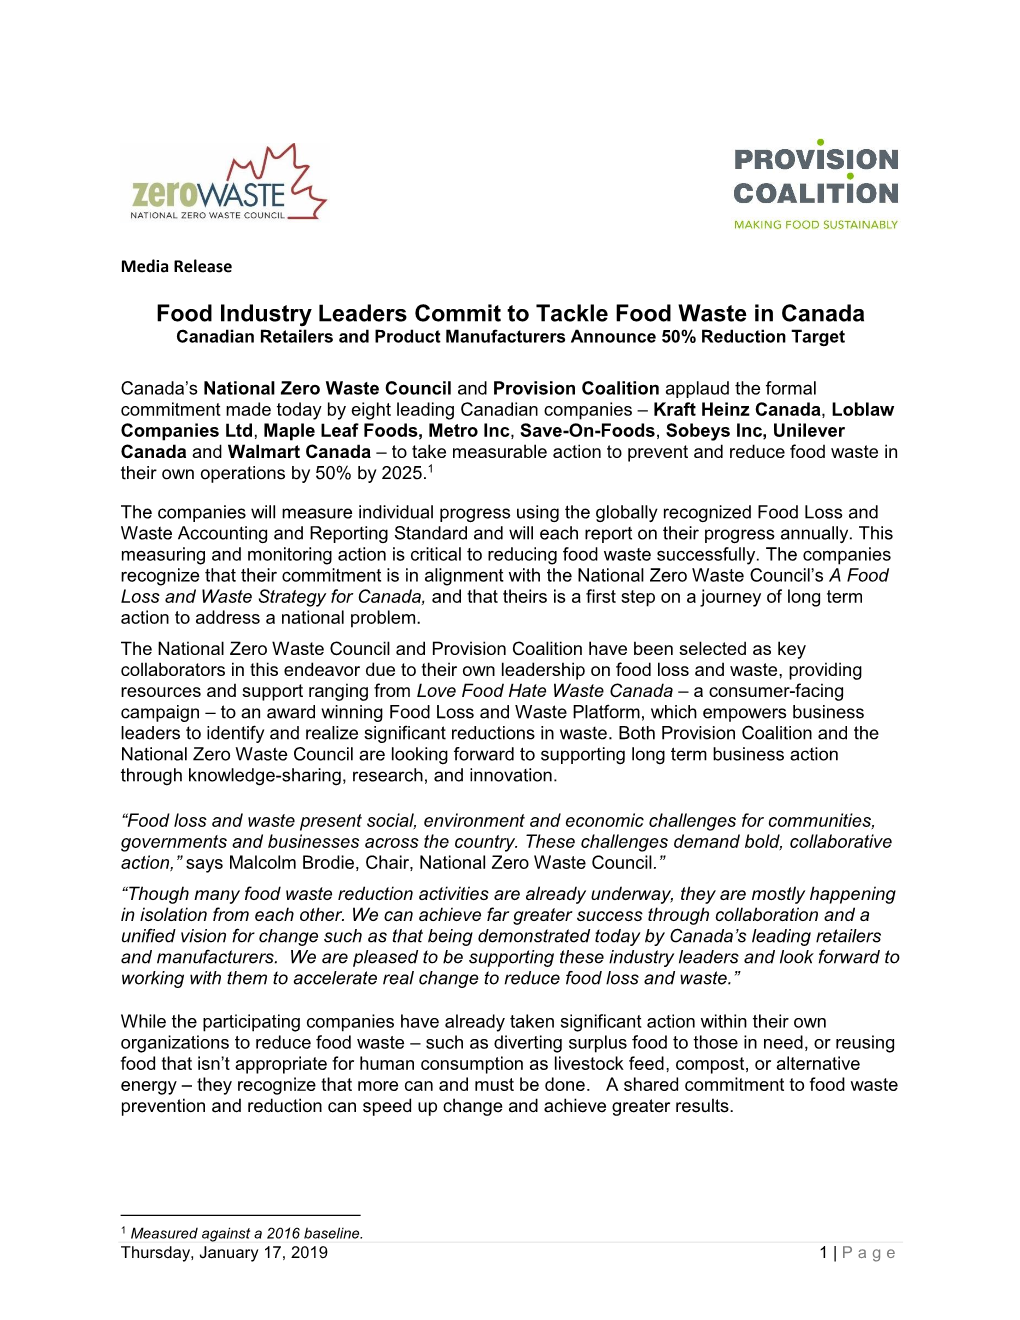 Food Industry Leaders Commit to Tackle Food Waste in Canada Canadian Retailers and Product Manufacturers Announce 50% Reduction Target